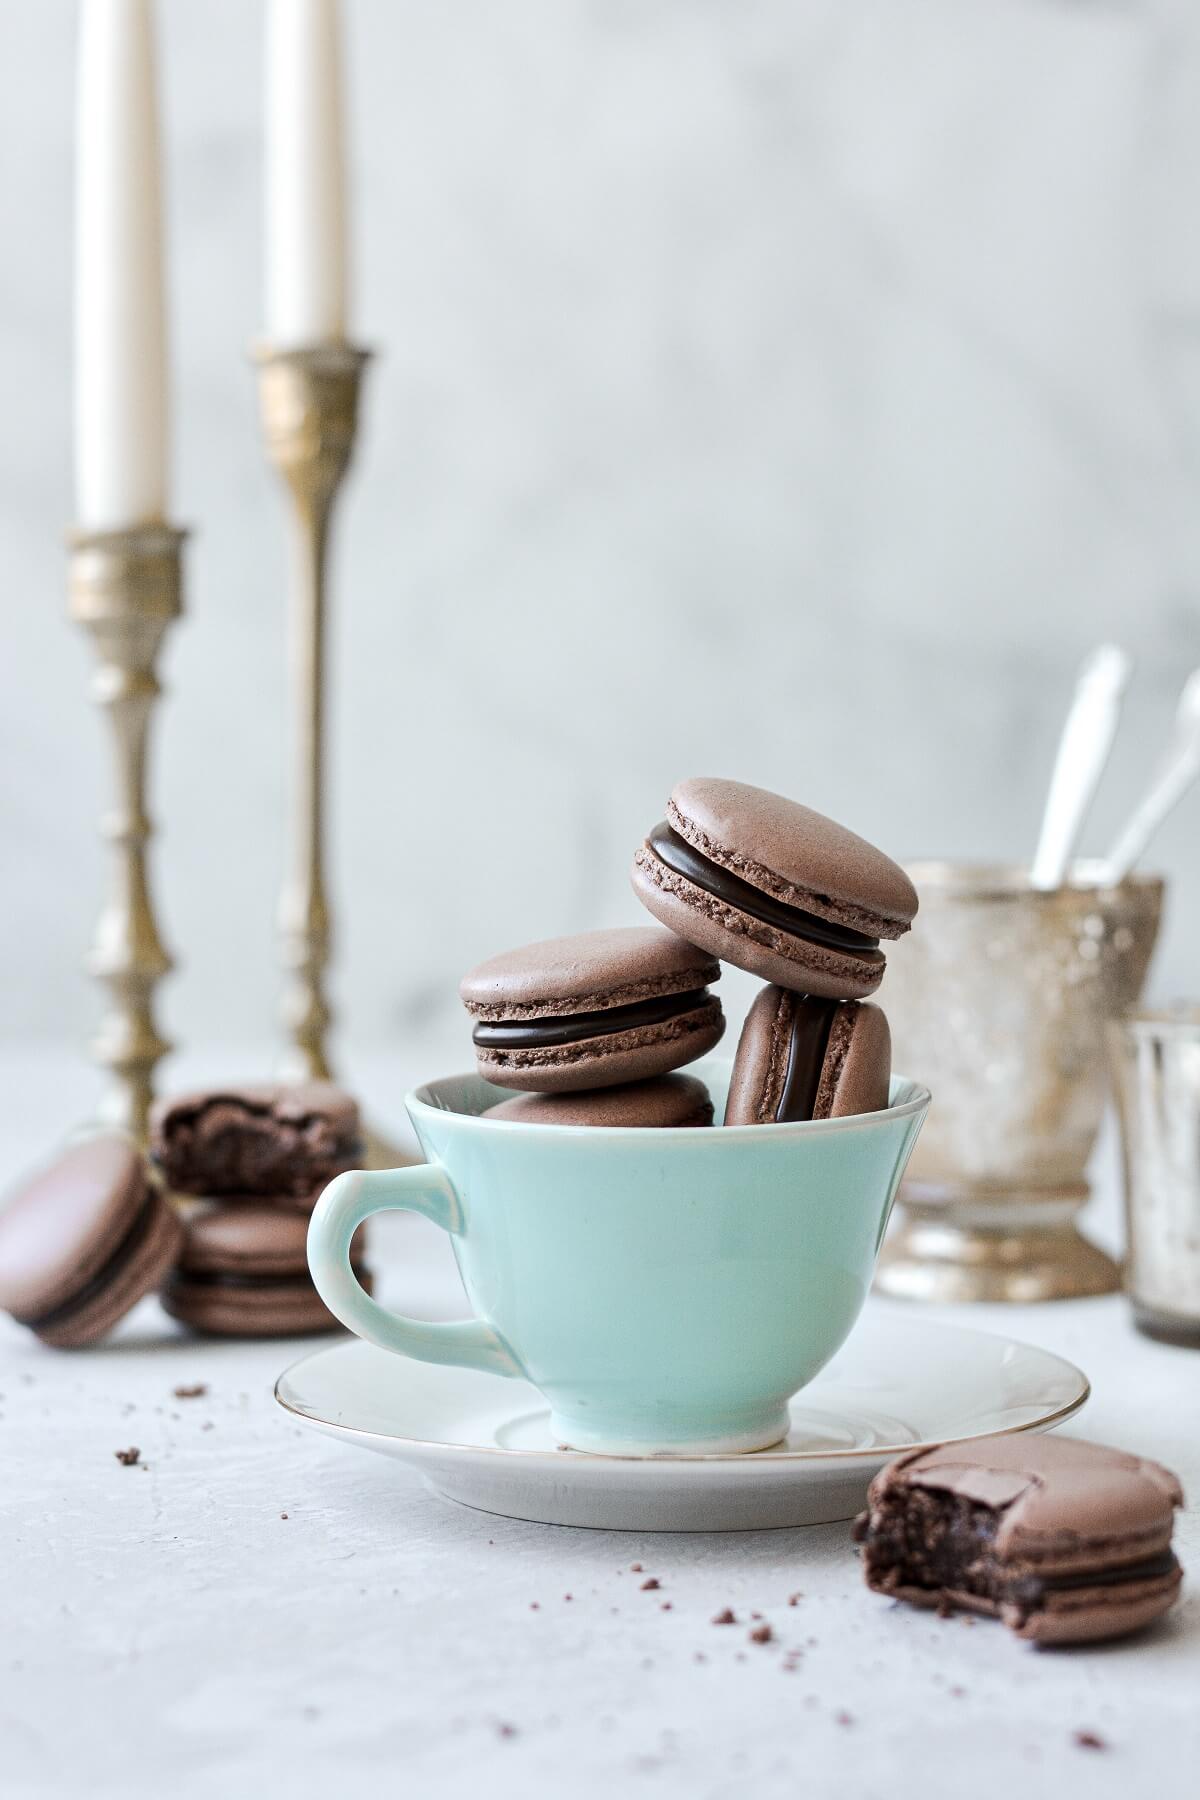 A cup of chocolate macaroons on the table - Oreo